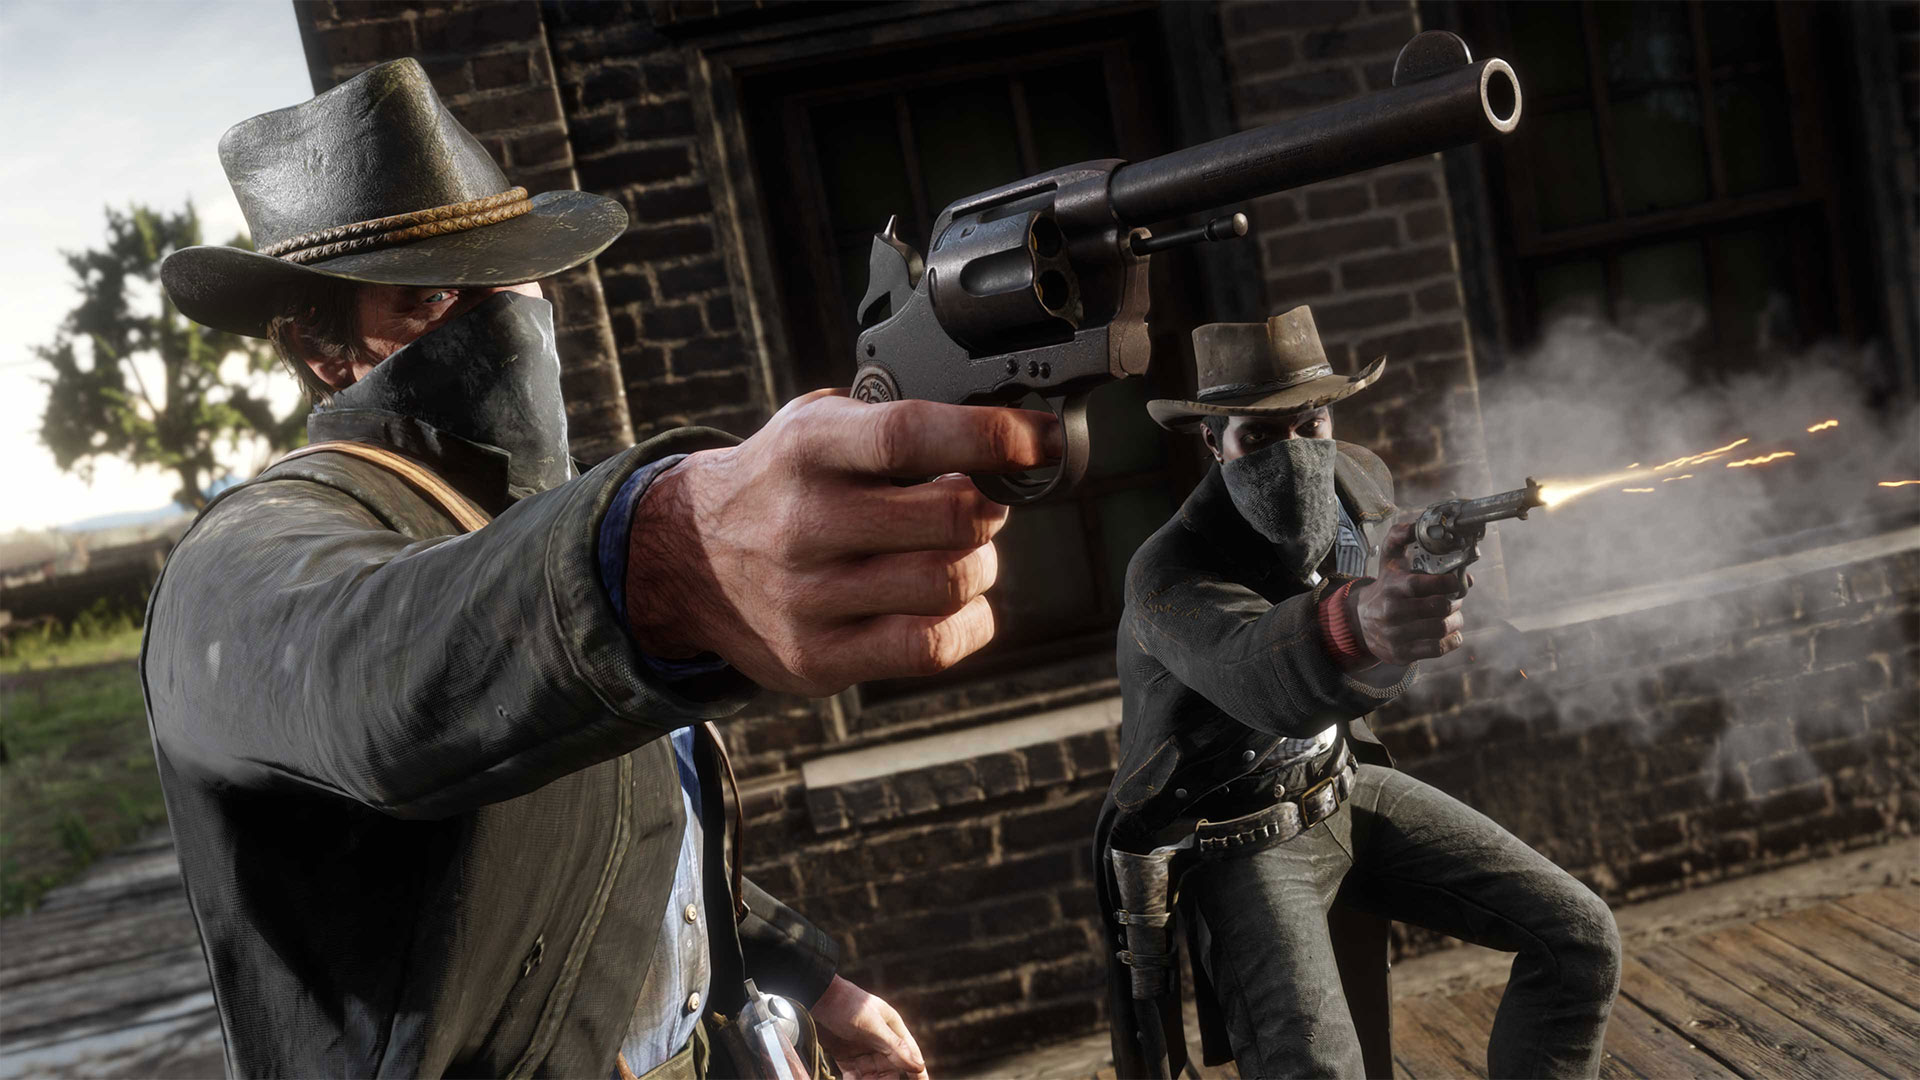 IGN - An eye-catching Steam sale has seen Rockstar's Red Dead Redemption 2  hit new heights, with more players on the platform than ever before. Link  in comments for more.